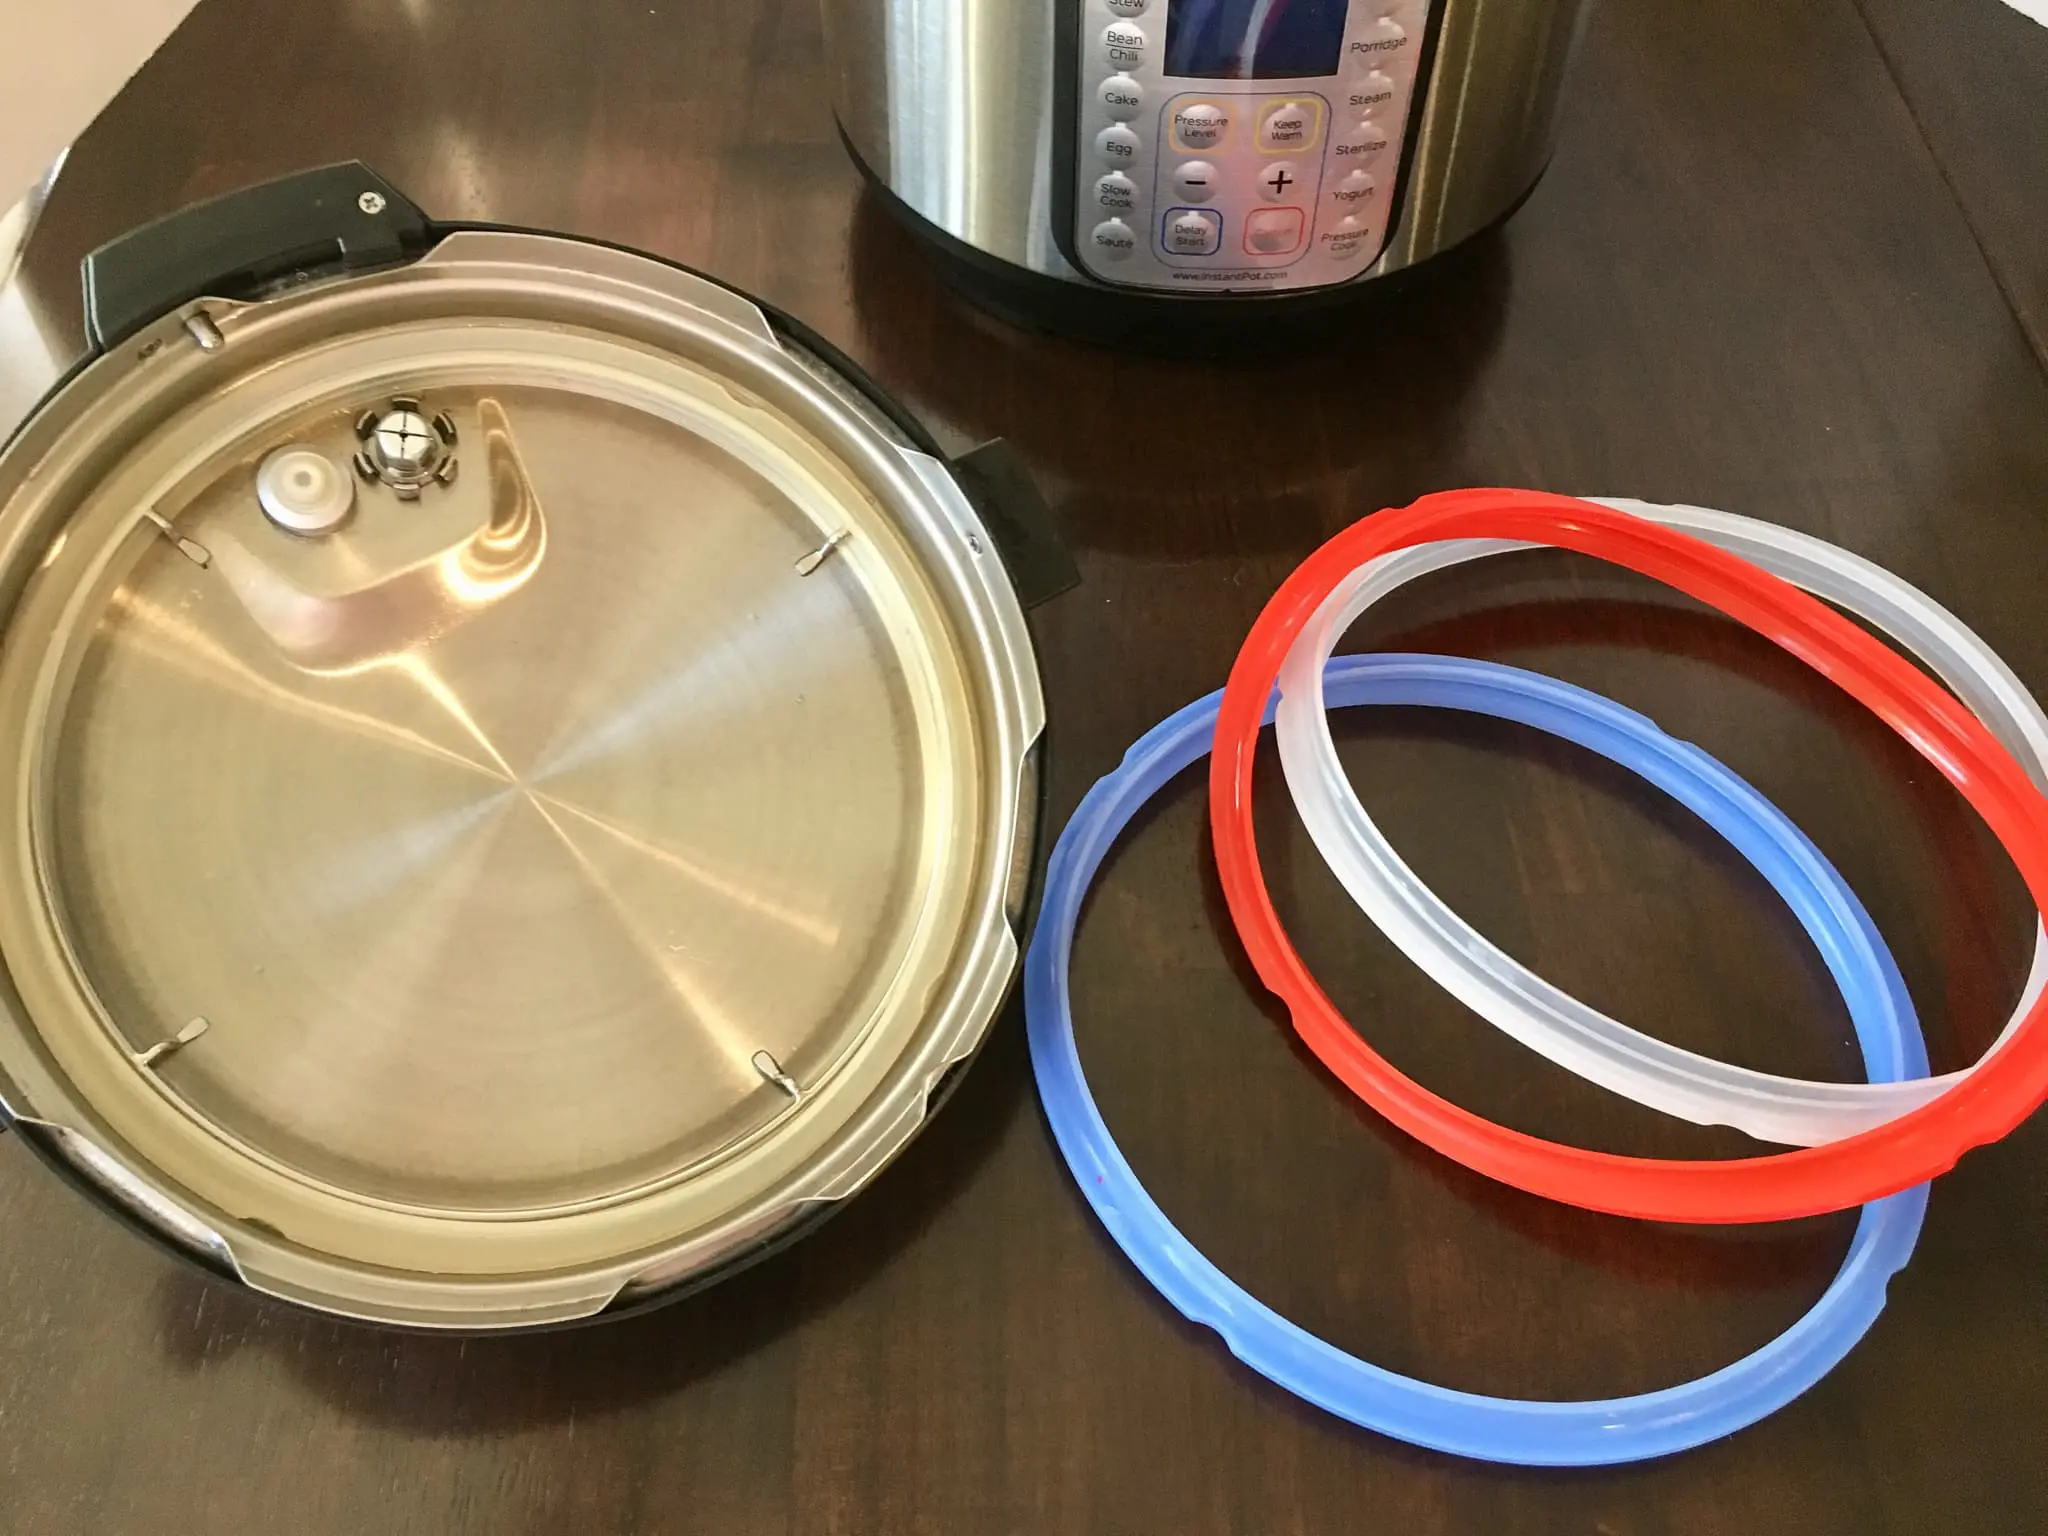 a sealing ring of the instant pot